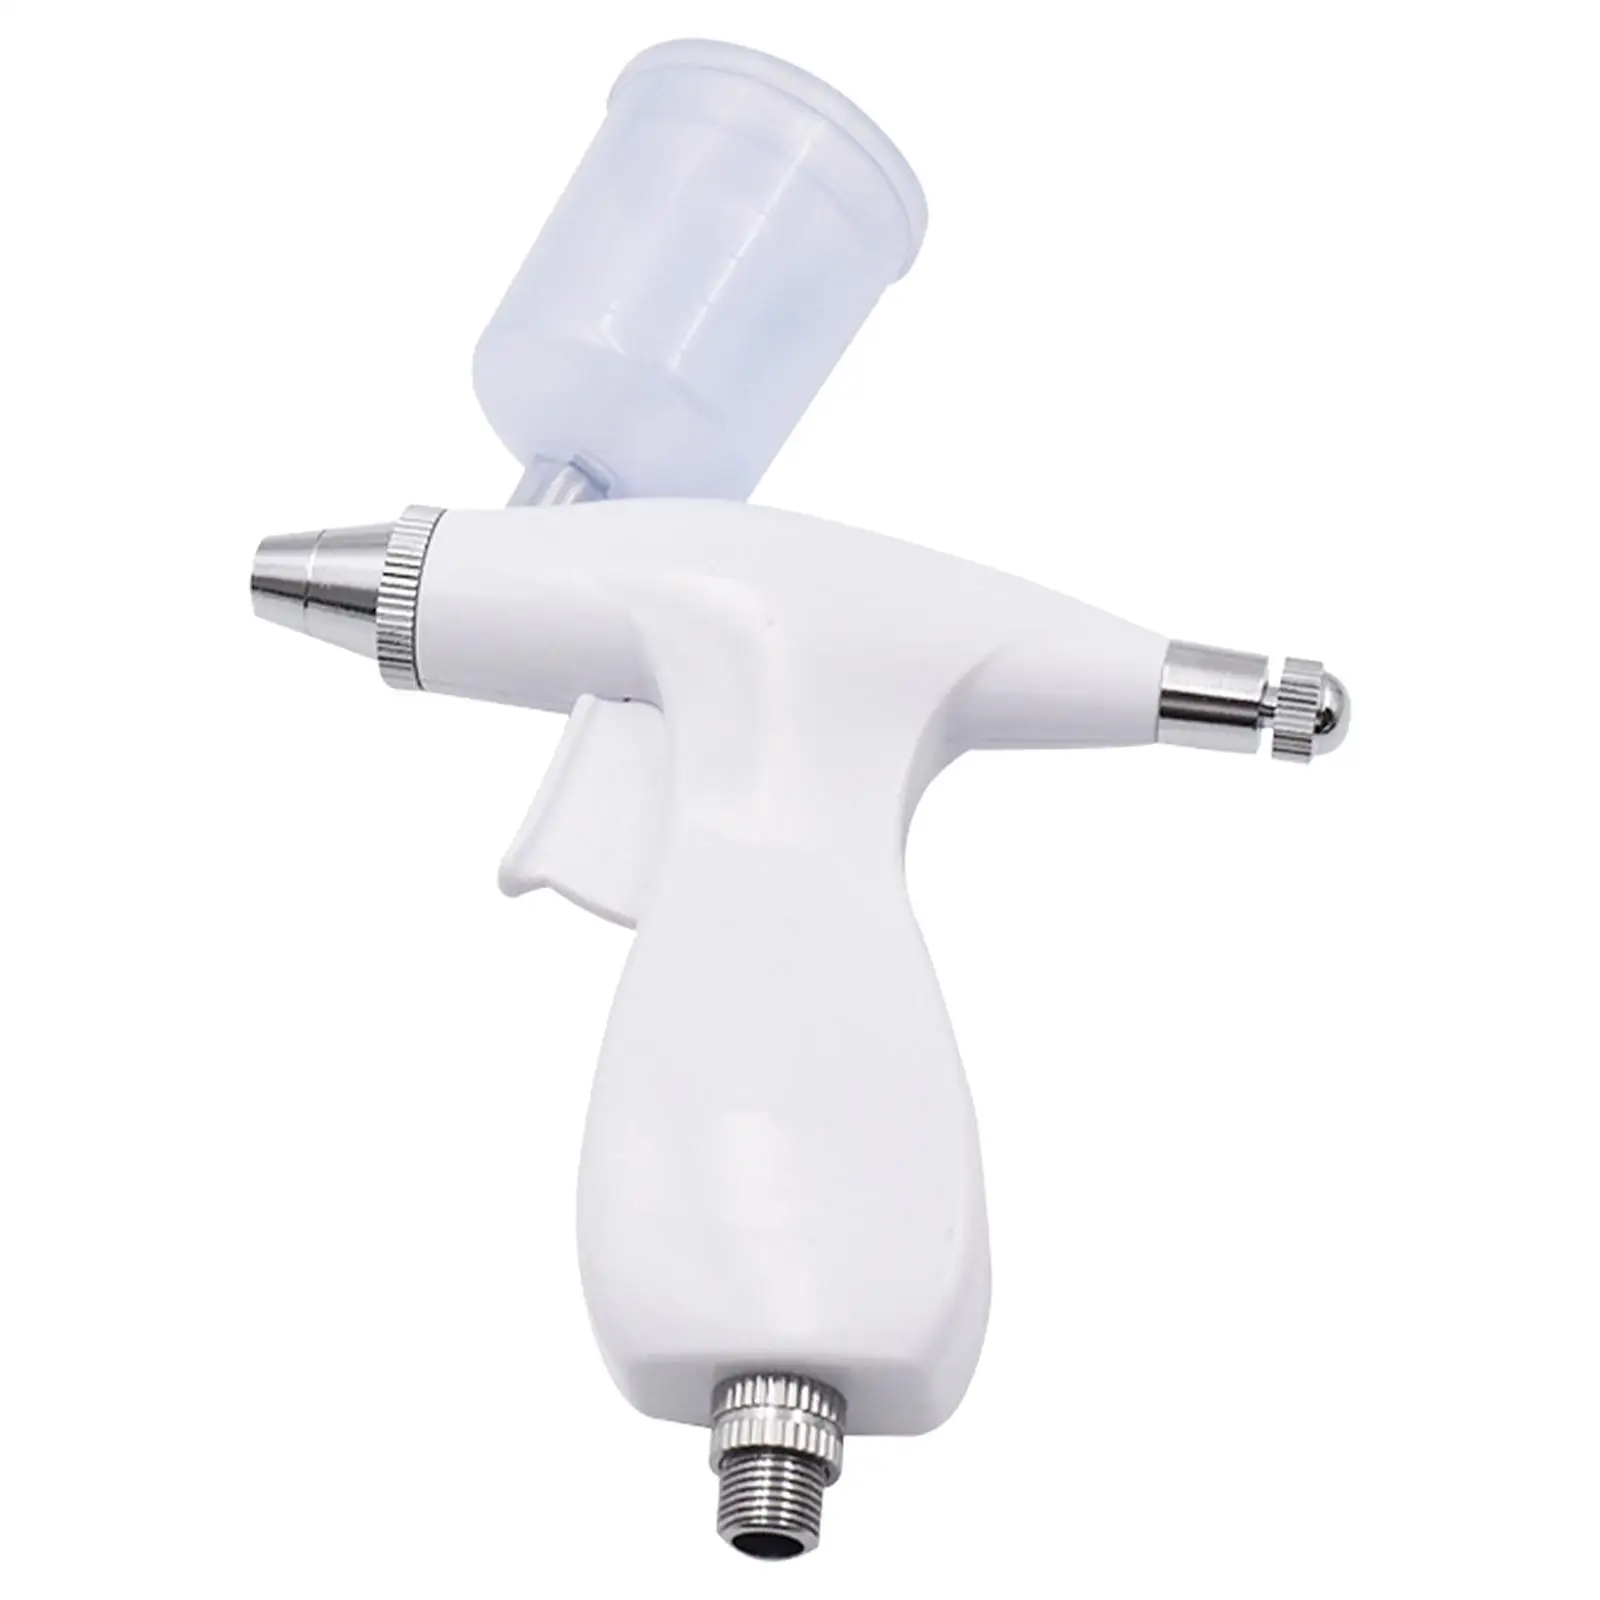 Mini Airbrush Spray Gun Airbrush Nozzle for Makeup Painting, Drawing & Art Supplies Cake Decorating Tattoo Face Paint